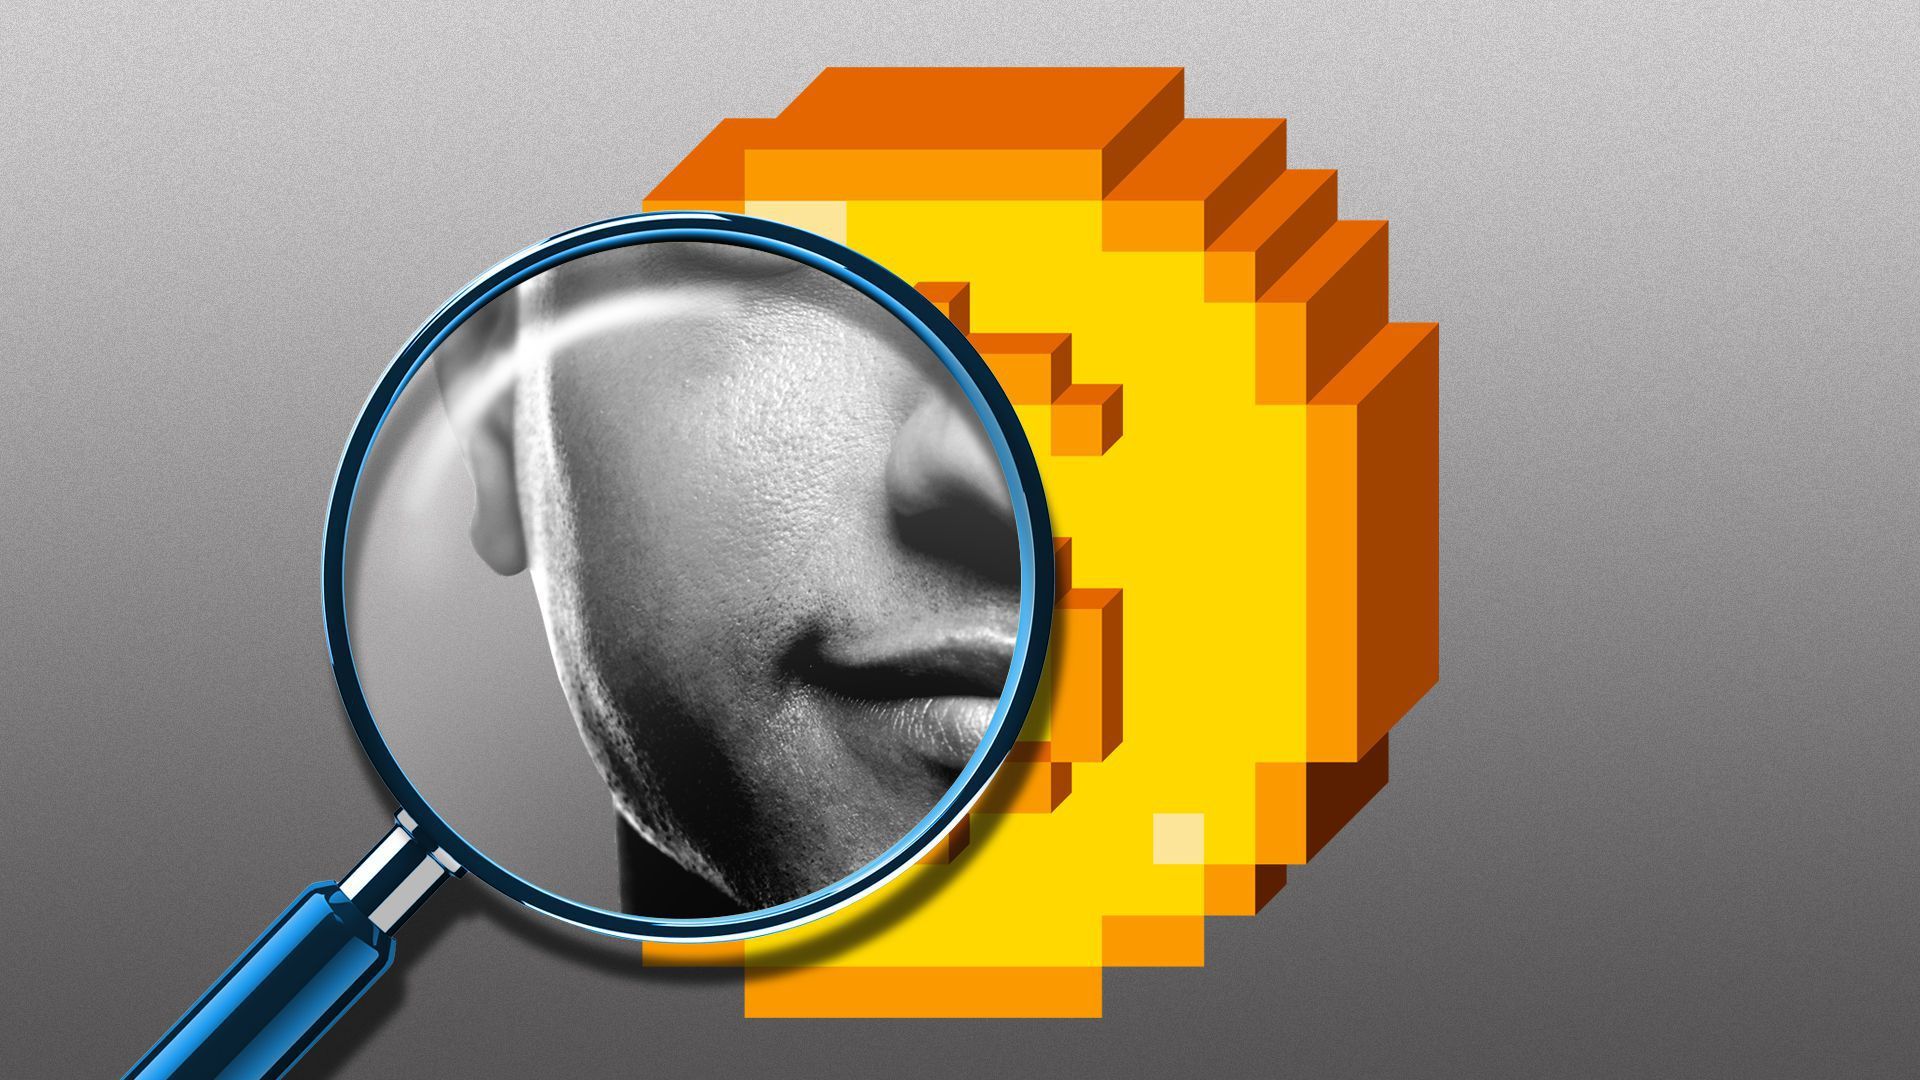 An illustration of a magnifying glass seeing a person from inside a crypto coin